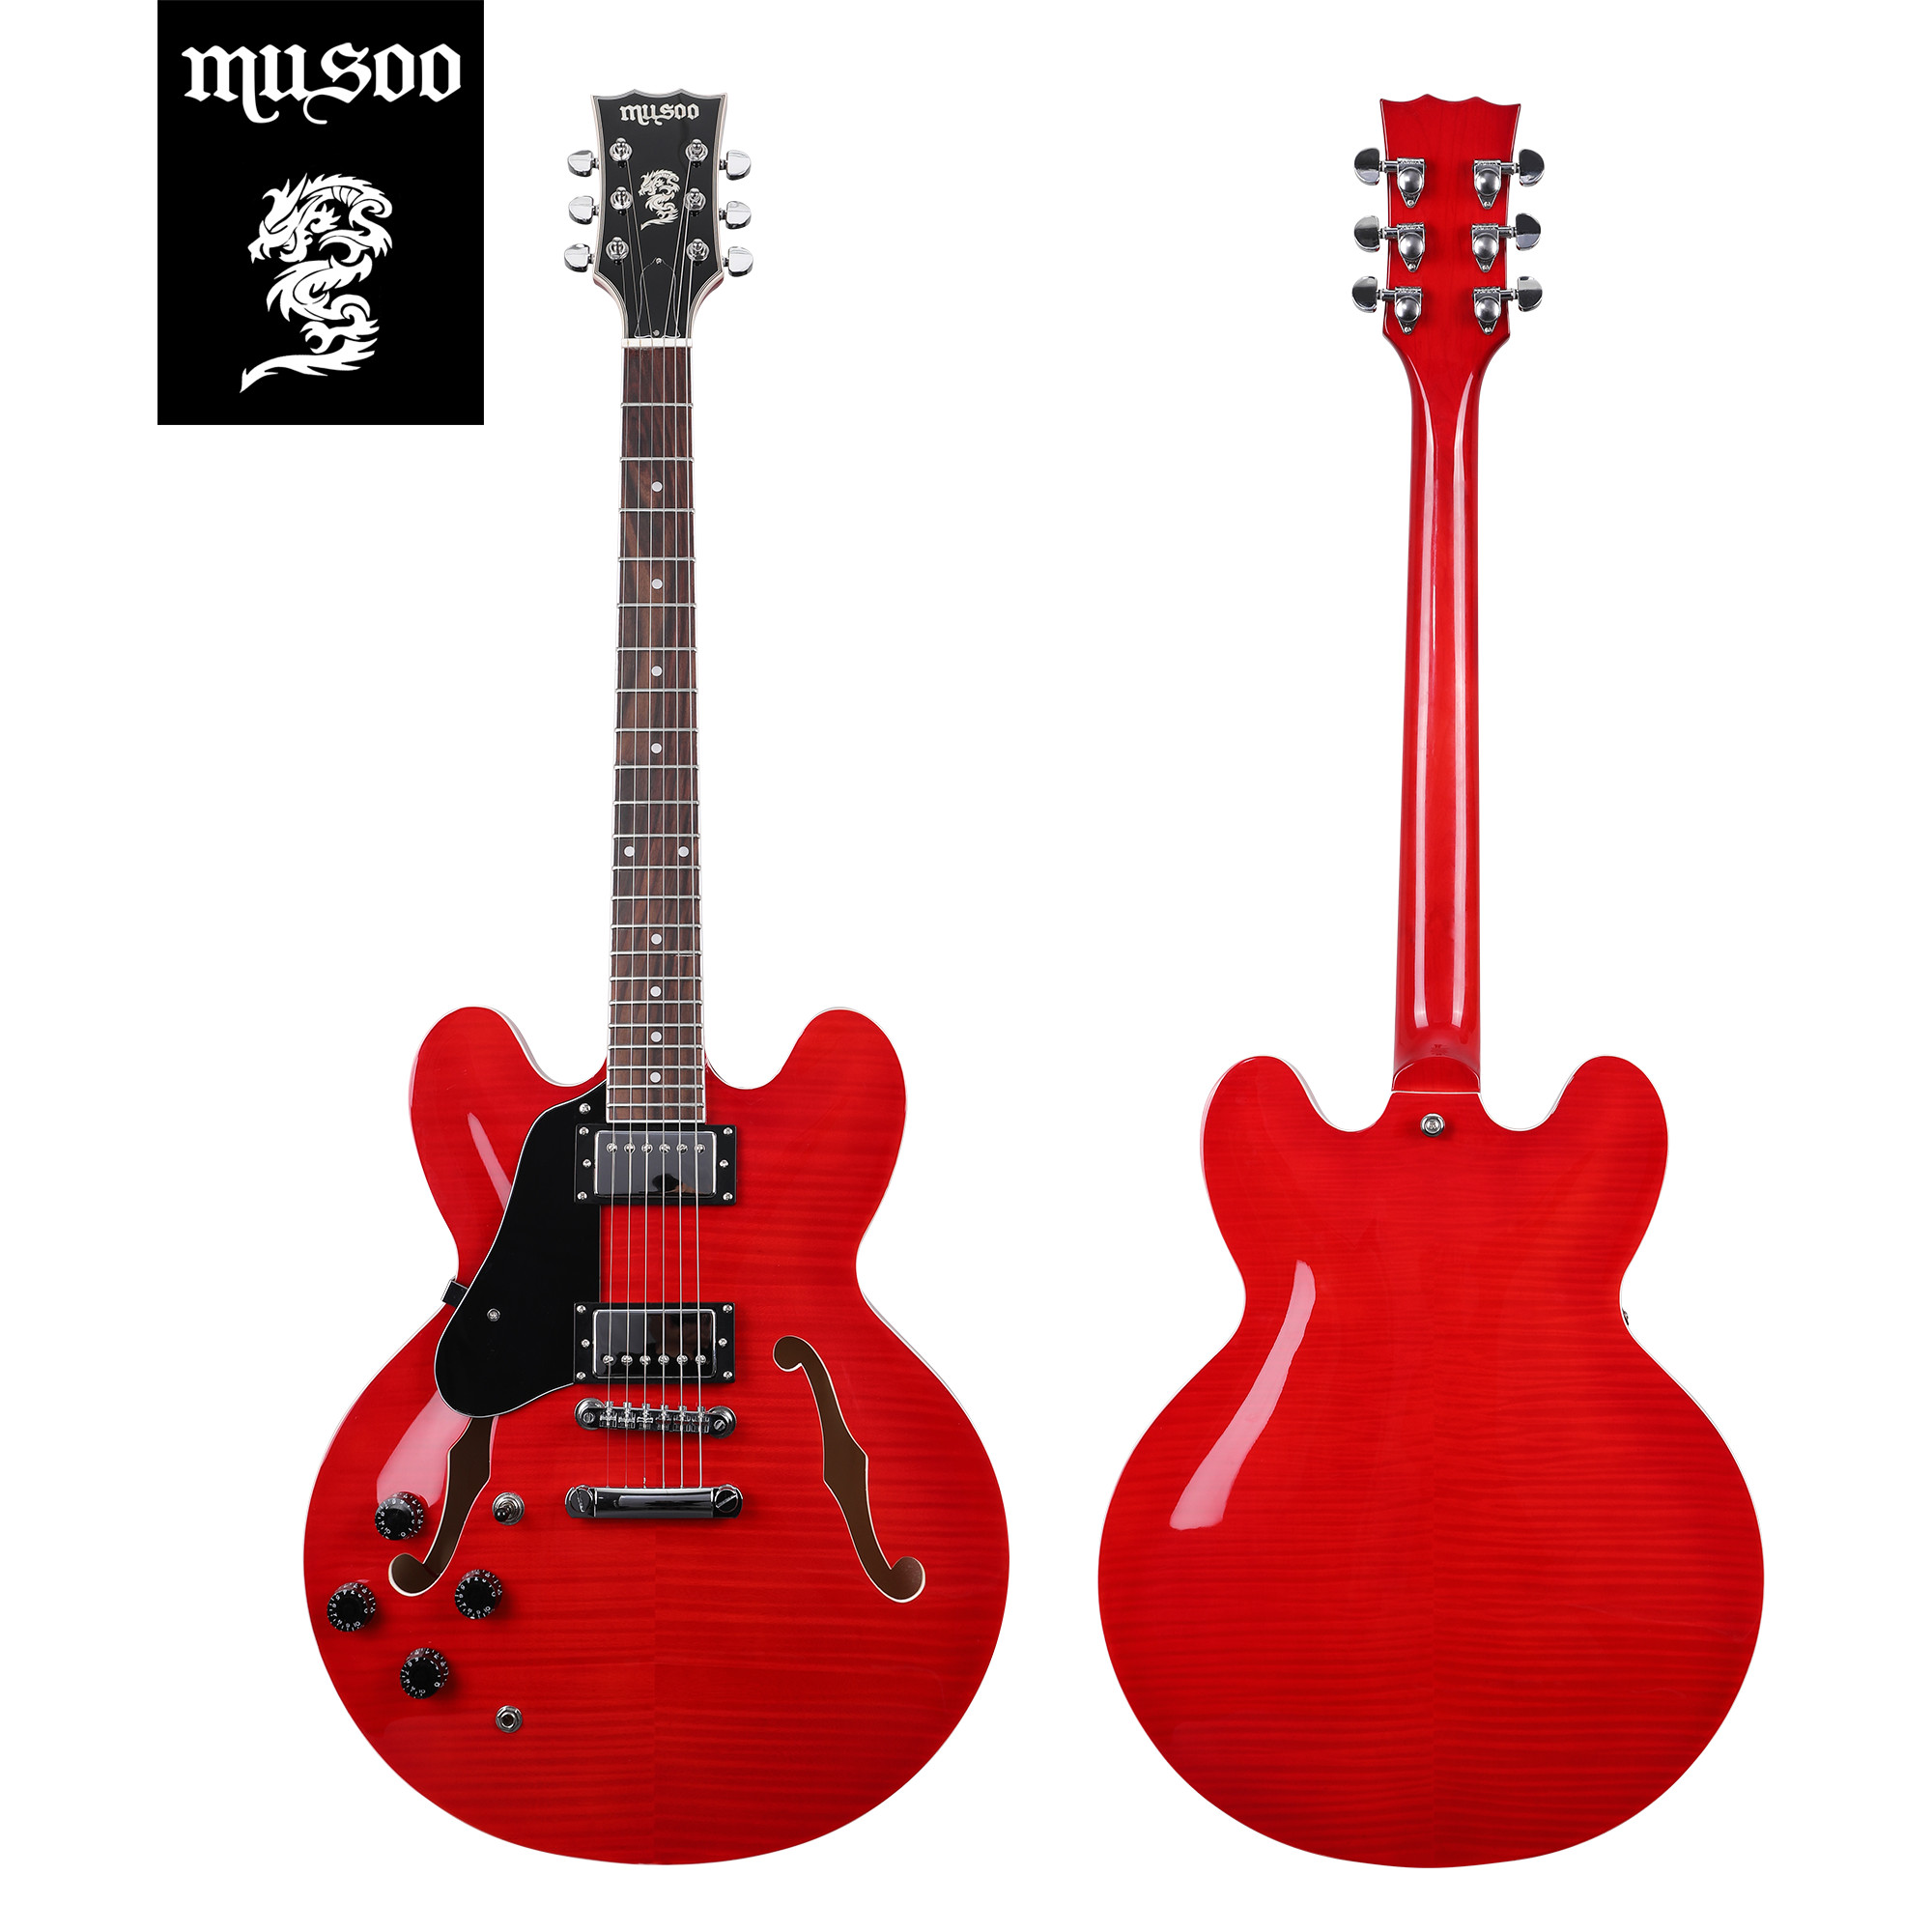 Musoo 335 style left hand Jazz Electric Guitar Flame Maple top Semi Hollow Body Chrome Hardware(EJ02)